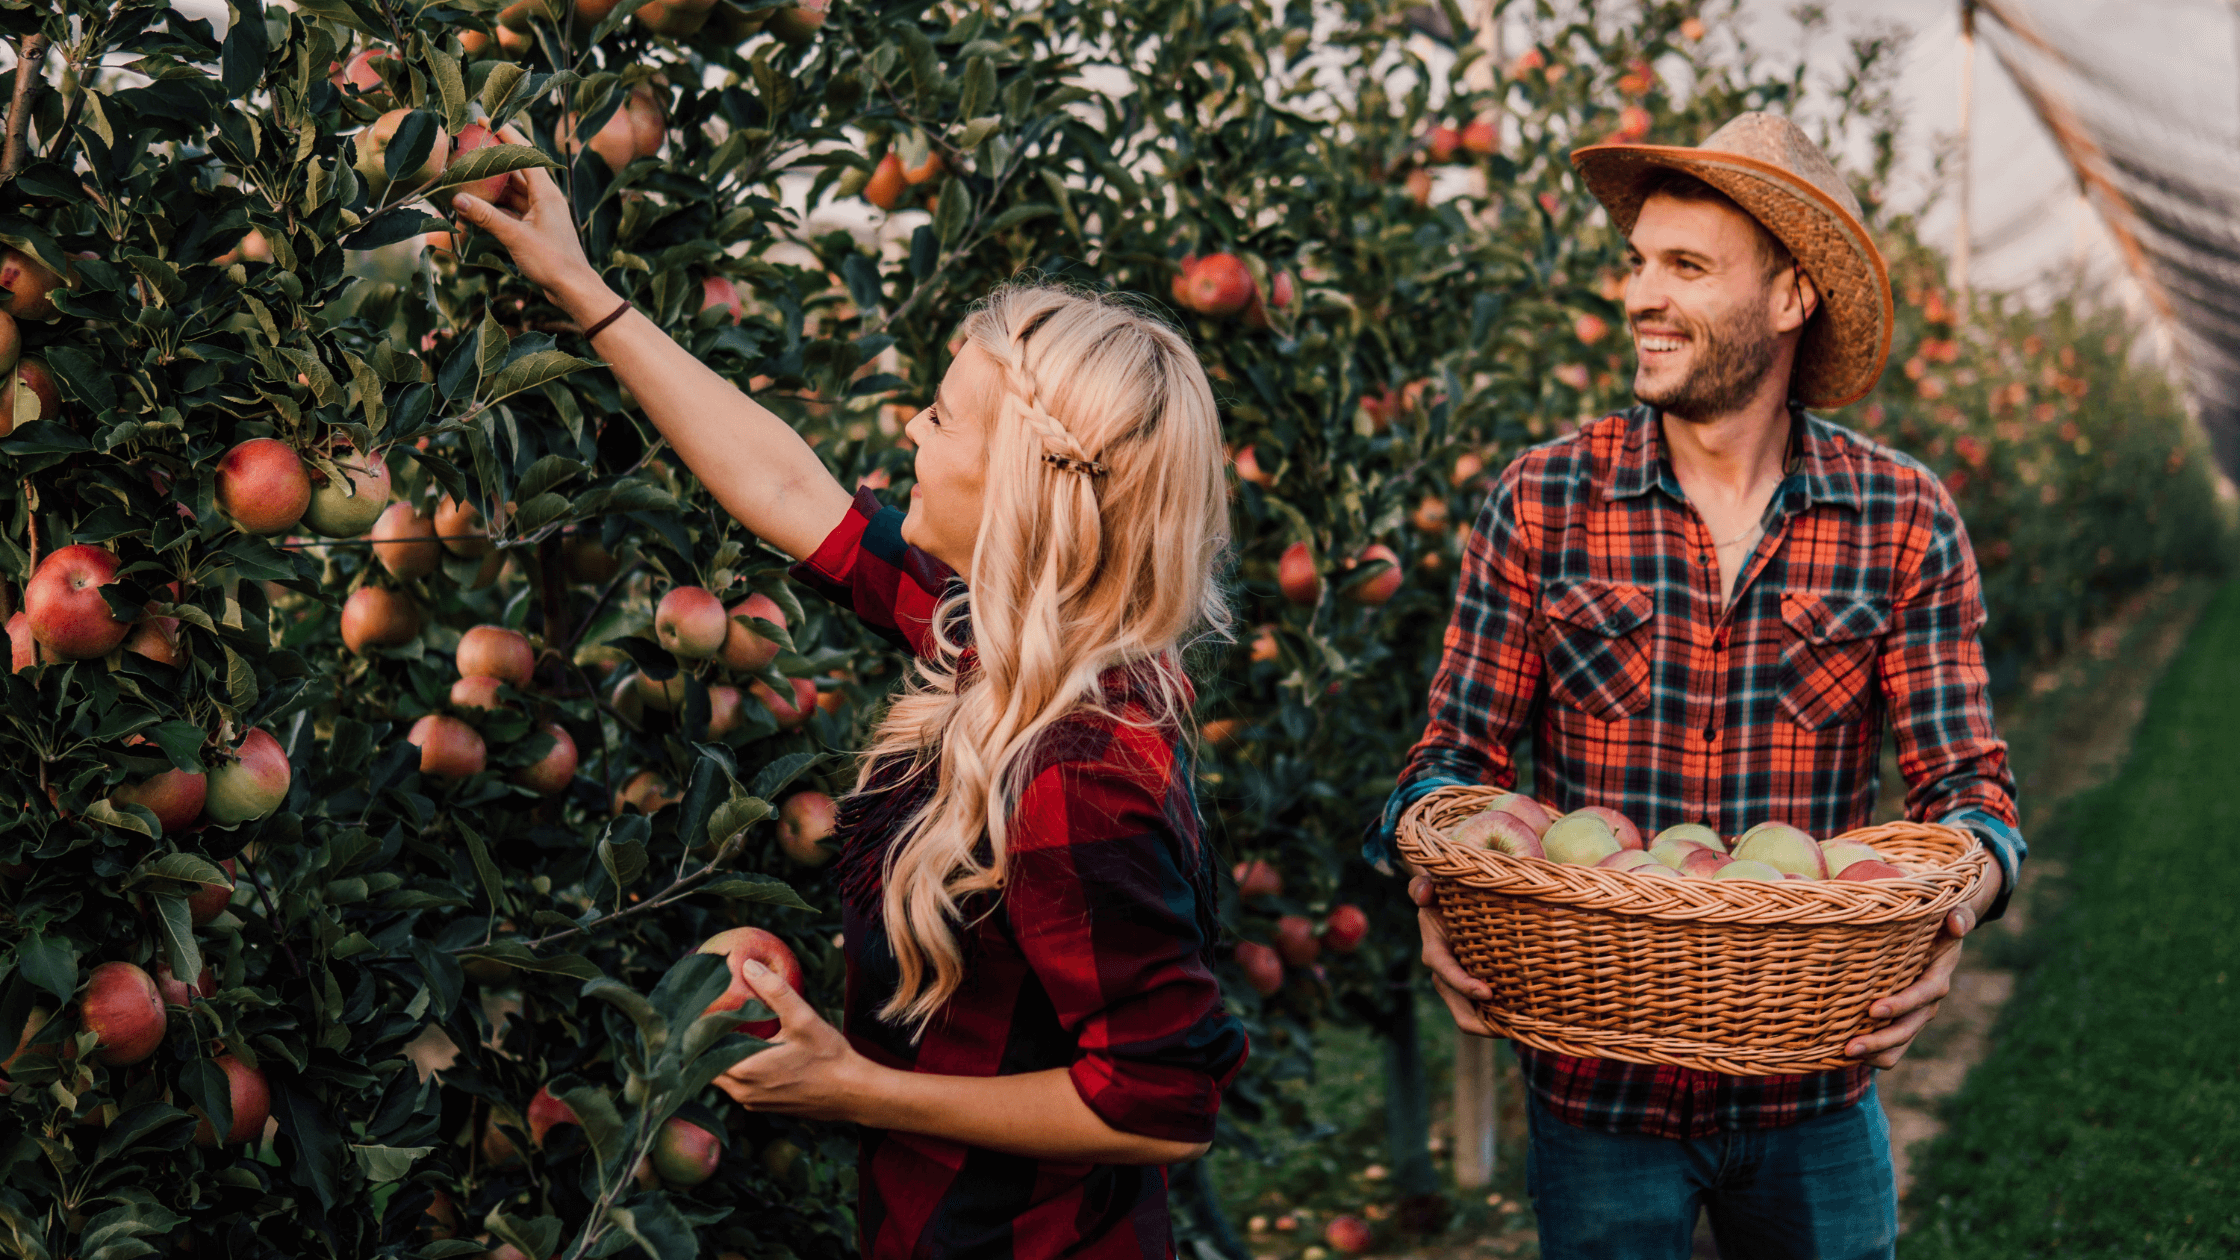 Fall in Love This Autumn: The Apple Picking Date You Won't Forget 1